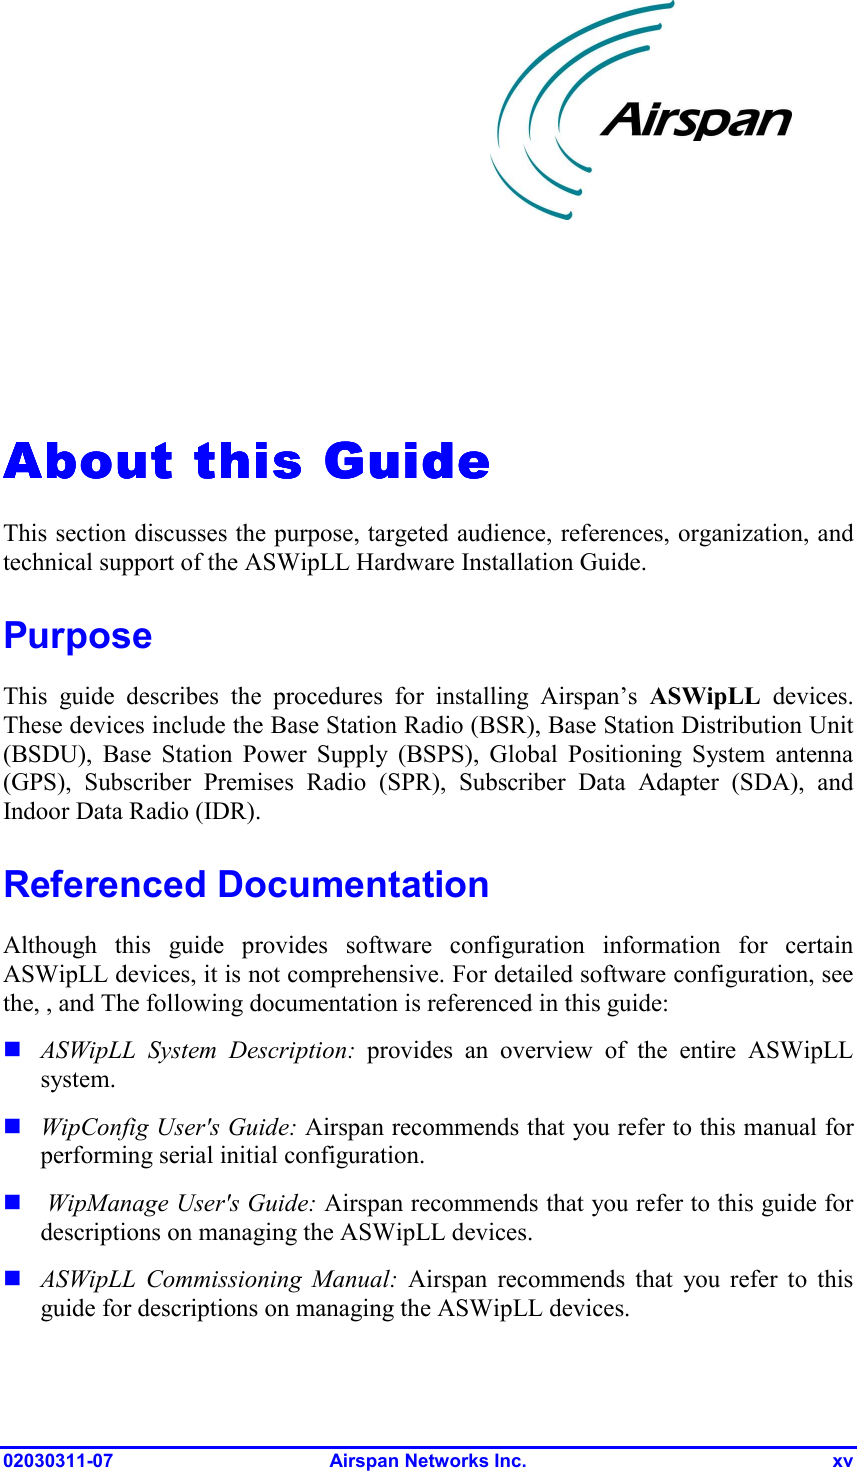  02030311-07 Airspan Networks Inc.  xv   About this GuideAbout this GuideAbout this GuideAbout this Guide    This section discusses the purpose, targeted audience, references, organization, and technical support of the ASWipLL Hardware Installation Guide.  Purpose This guide describes the procedures for installing Airspan’s ASWipLL devices. These devices include the Base Station Radio (BSR), Base Station Distribution Unit (BSDU), Base Station Power Supply (BSPS), Global Positioning System antenna (GPS), Subscriber Premises Radio (SPR), Subscriber Data Adapter (SDA), and Indoor Data Radio (IDR). Referenced Documentation Although this guide provides software configuration information for certain ASWipLL devices, it is not comprehensive. For detailed software configuration, see the, , and The following documentation is referenced in this guide: ! ASWipLL System Description: provides an overview of the entire ASWipLL system. ! WipConfig User&apos;s Guide: Airspan recommends that you refer to this manual for performing serial initial configuration. !  WipManage User&apos;s Guide: Airspan recommends that you refer to this guide for descriptions on managing the ASWipLL devices. ! ASWipLL Commissioning Manual: Airspan recommends that you refer to this guide for descriptions on managing the ASWipLL devices.  